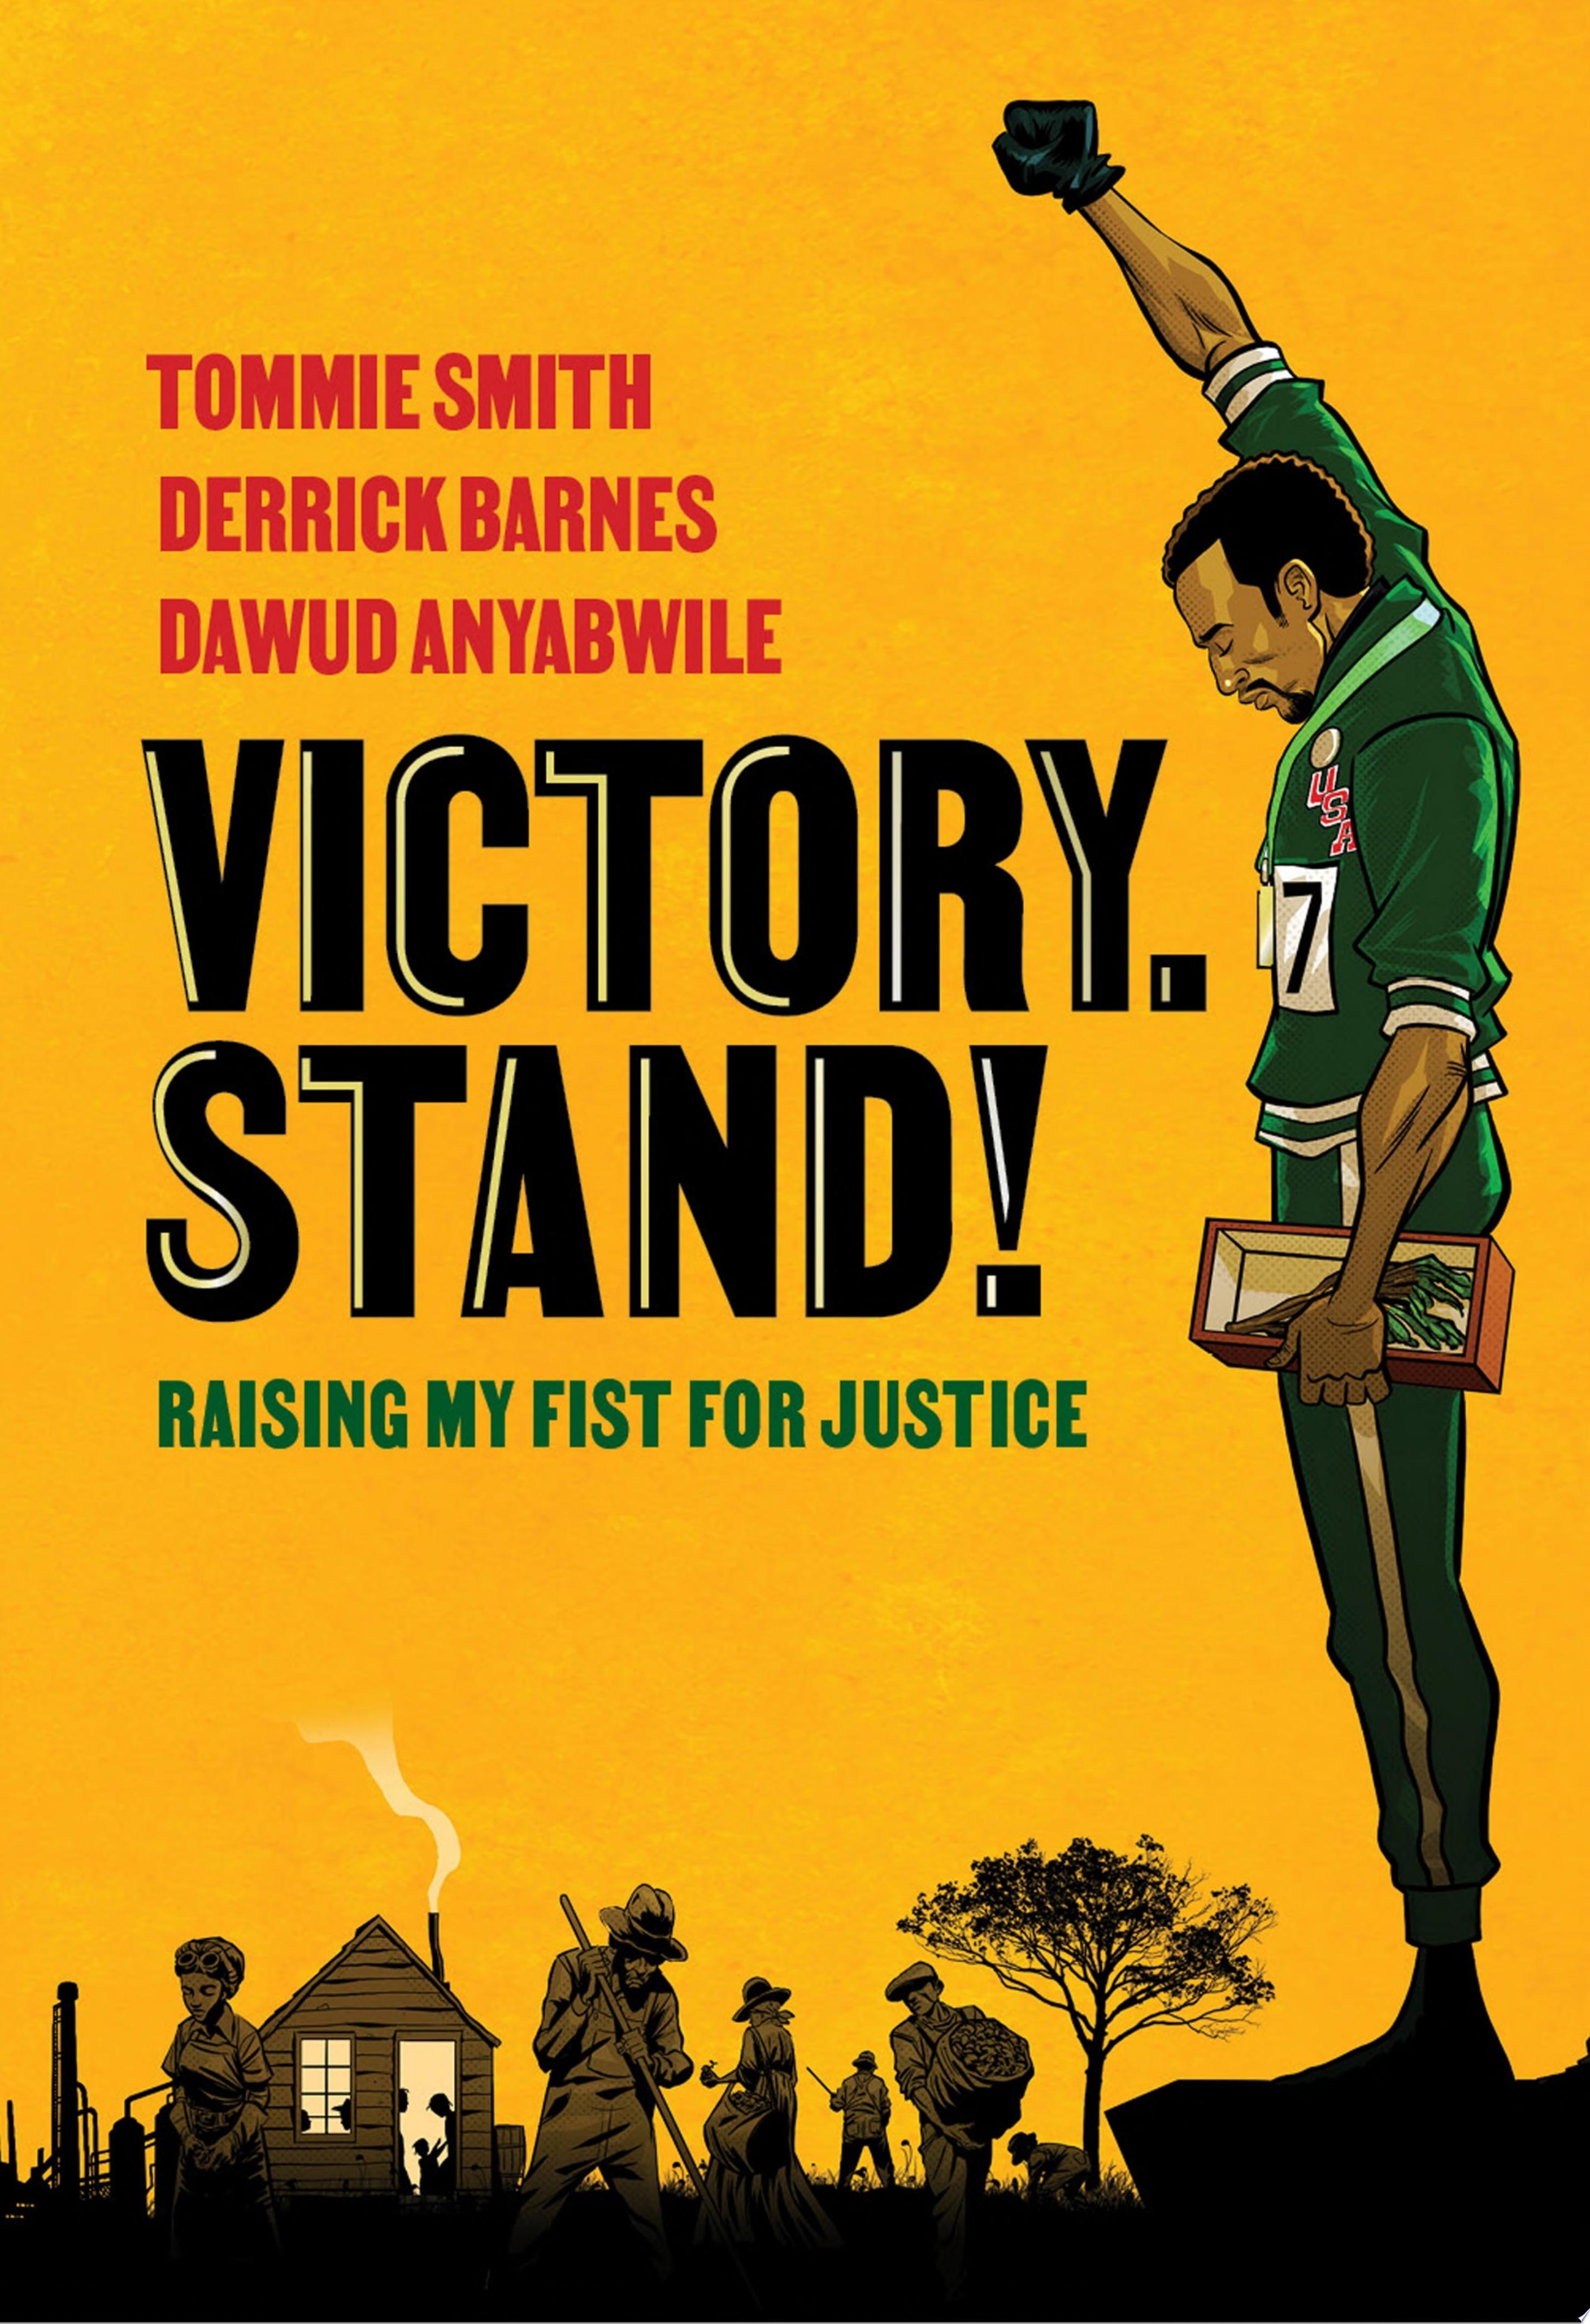 Image for "Victory. Stand!: Raising My Fist for Justice"